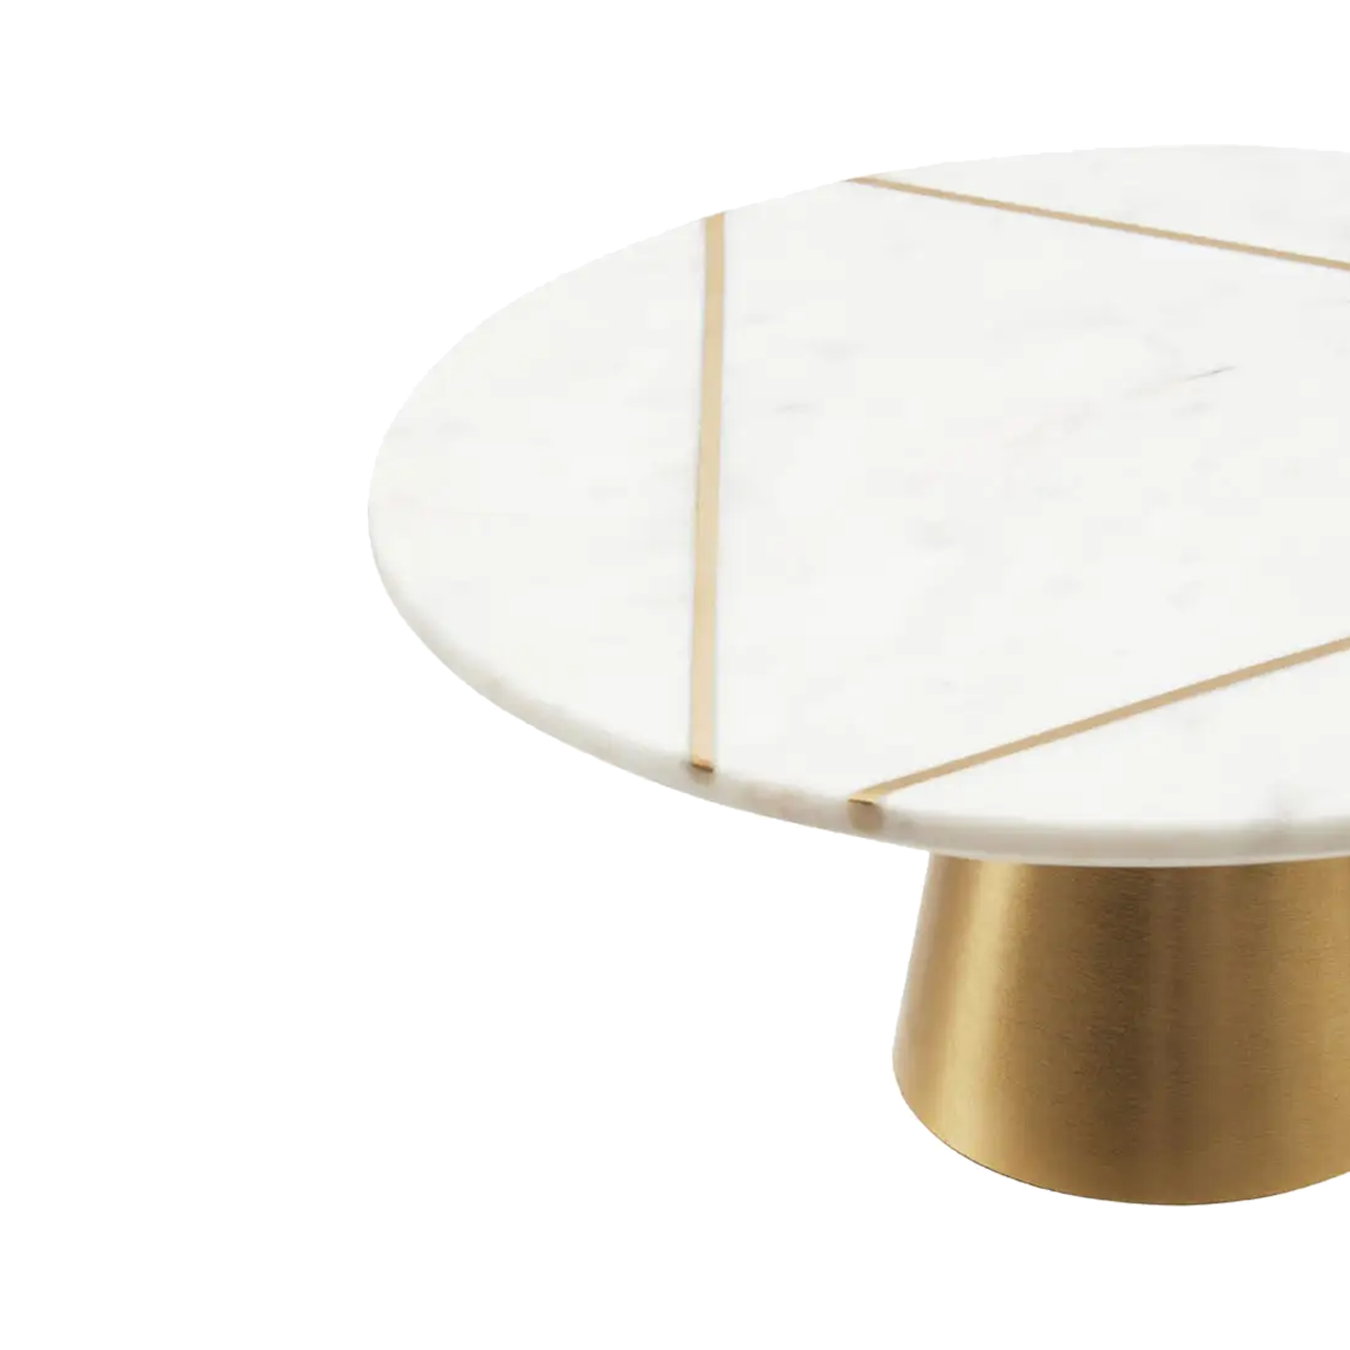 White Marble Cake Stand